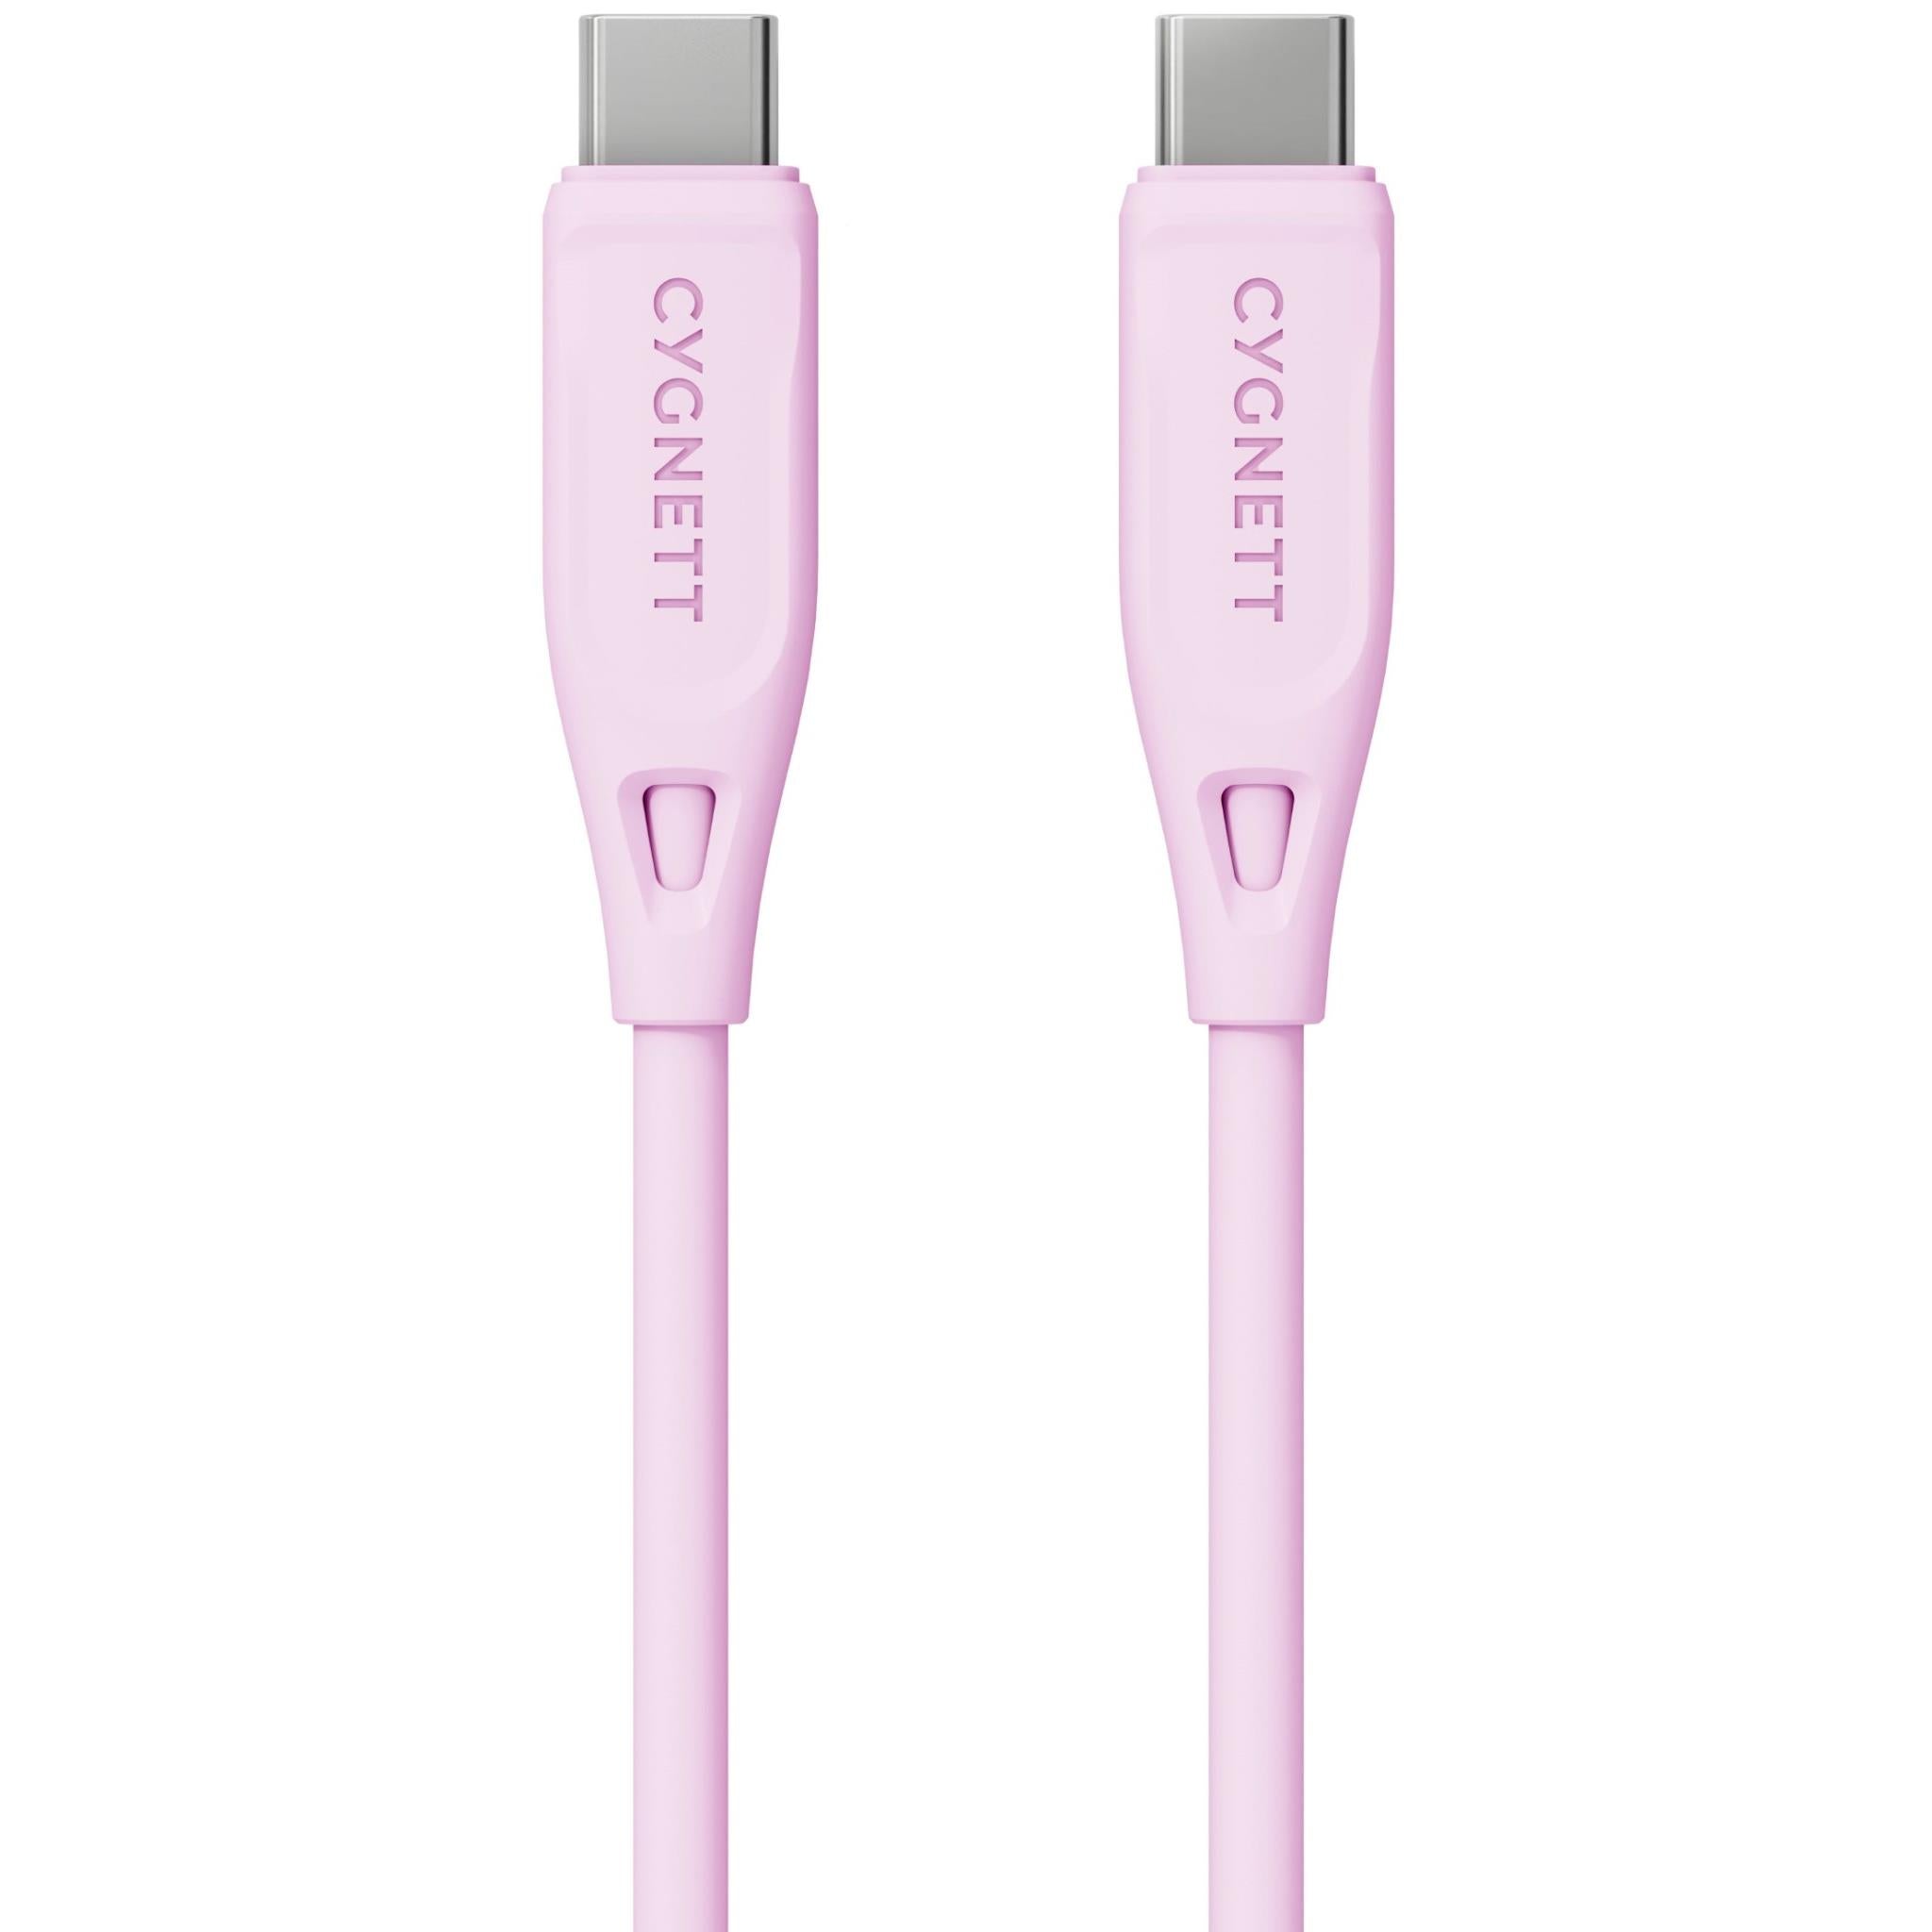 cygnett charge & connect usb-c to usb-c 2.0 cable v2 1.2m (pink)